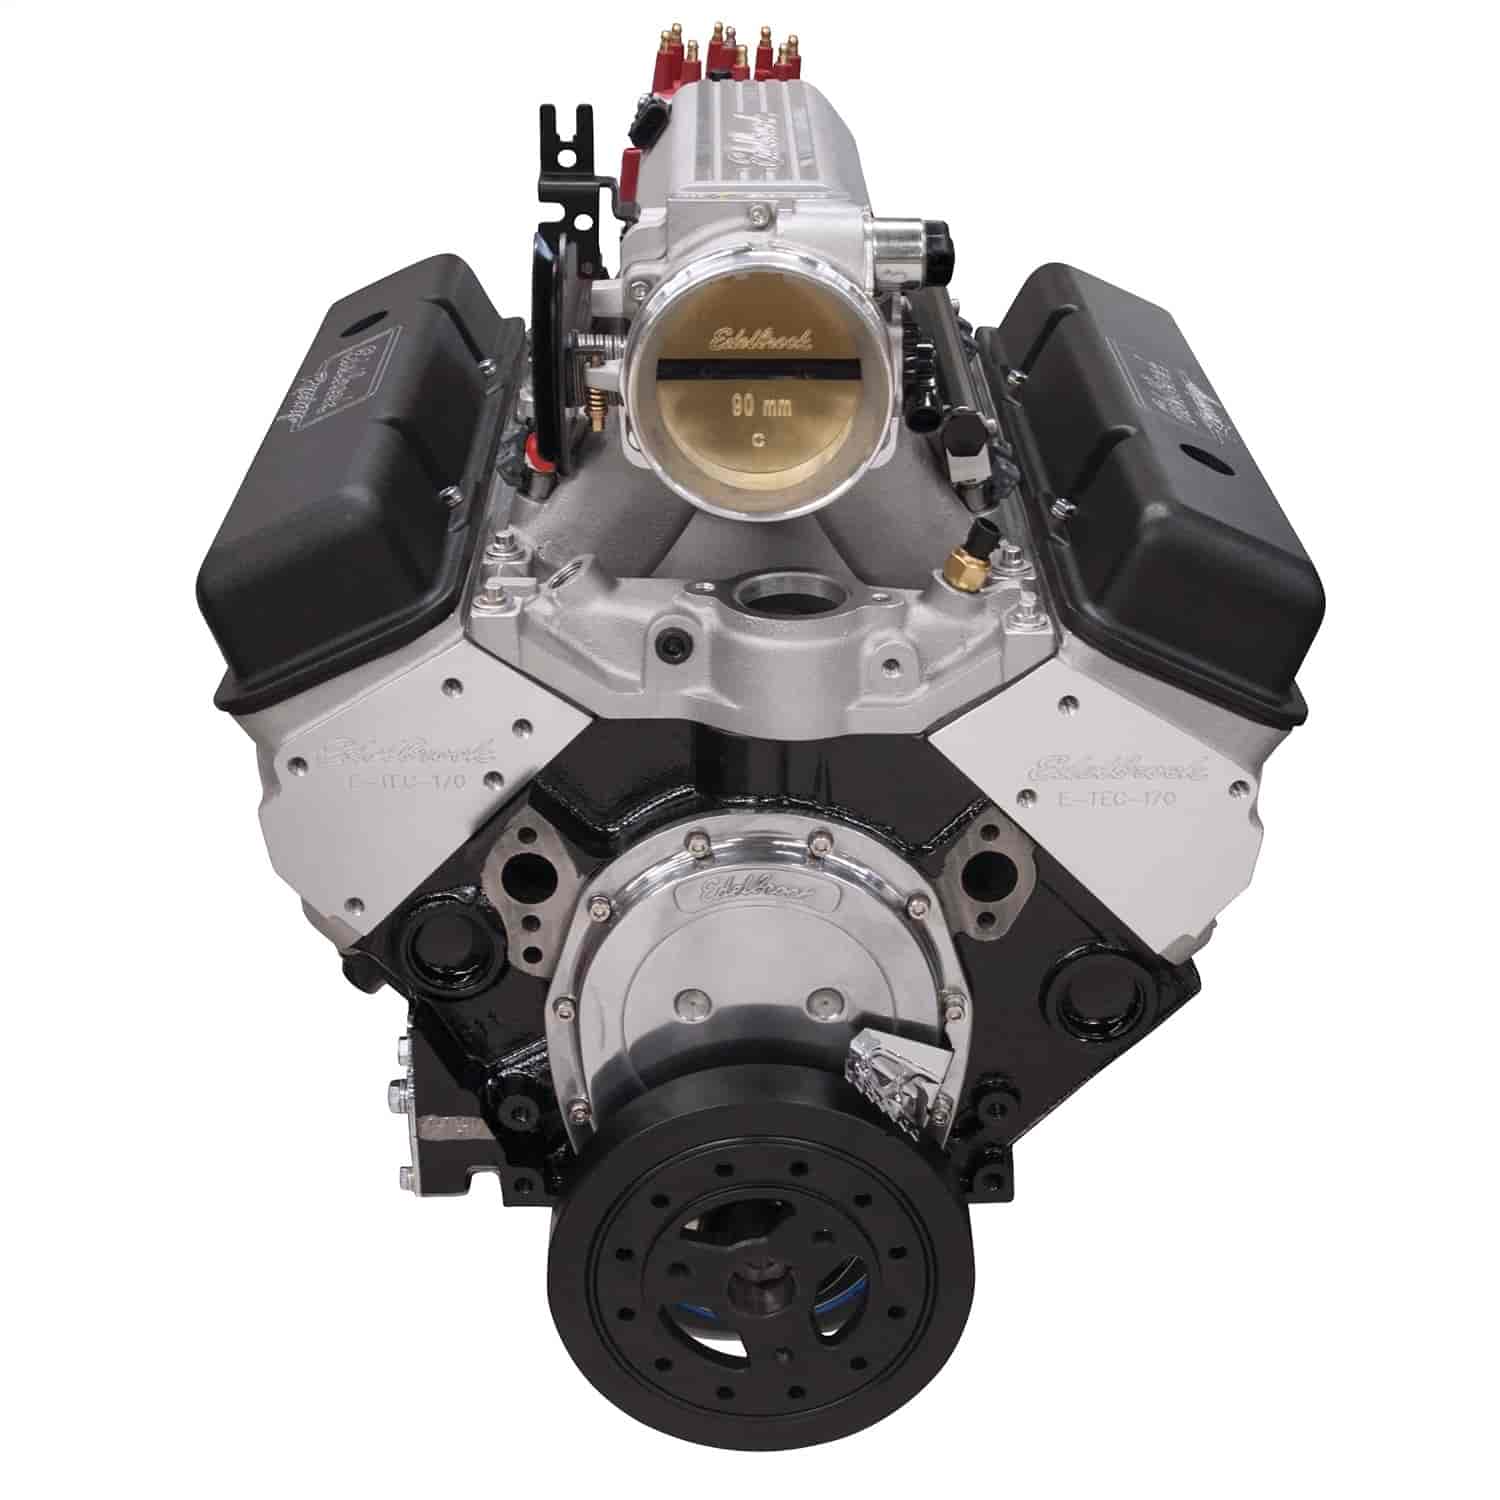 Performer Pro-Flo XT EFI Small Block Chevy 350ci  / 380hp Crate Engine in Satin Aluminum Finish